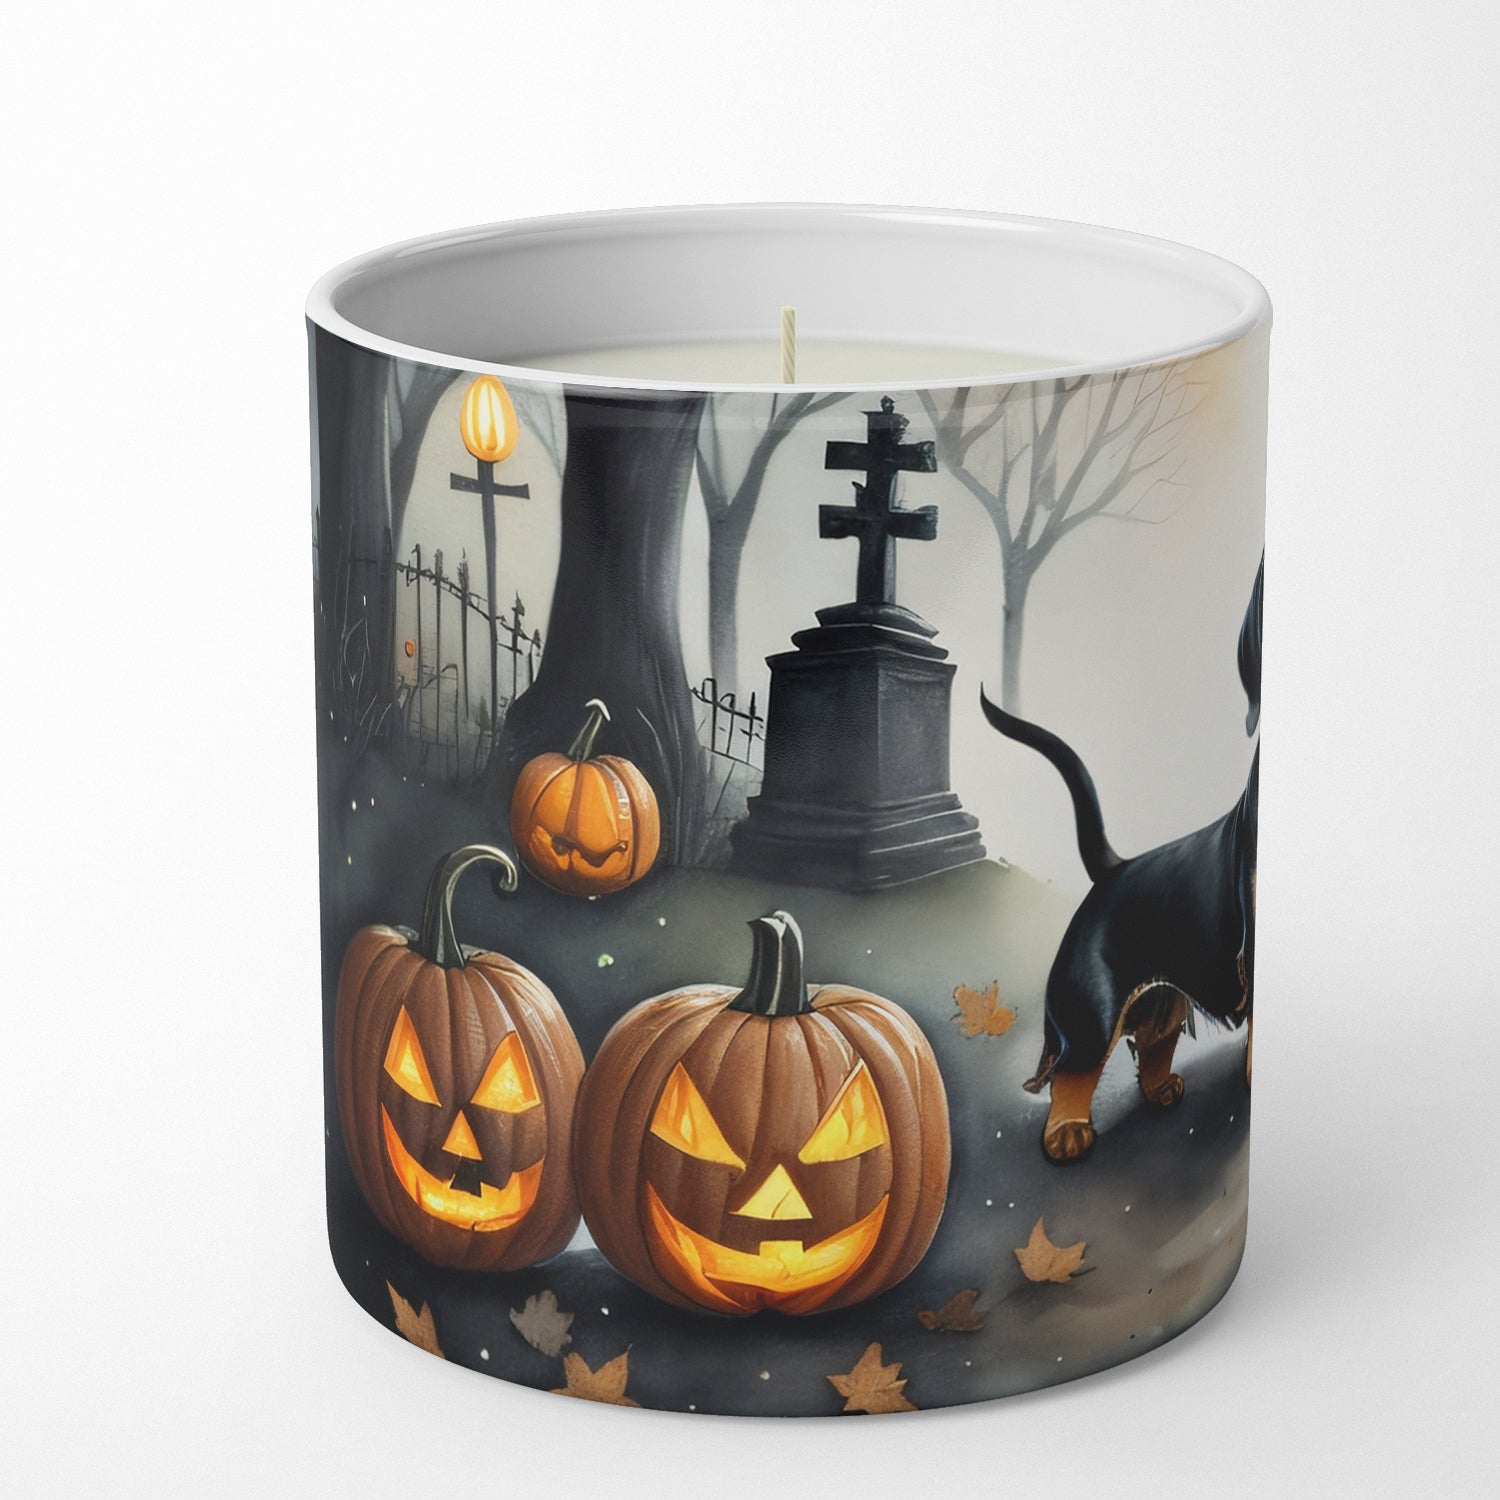 Dachshund Spooky Halloween Decorative Soy Candle